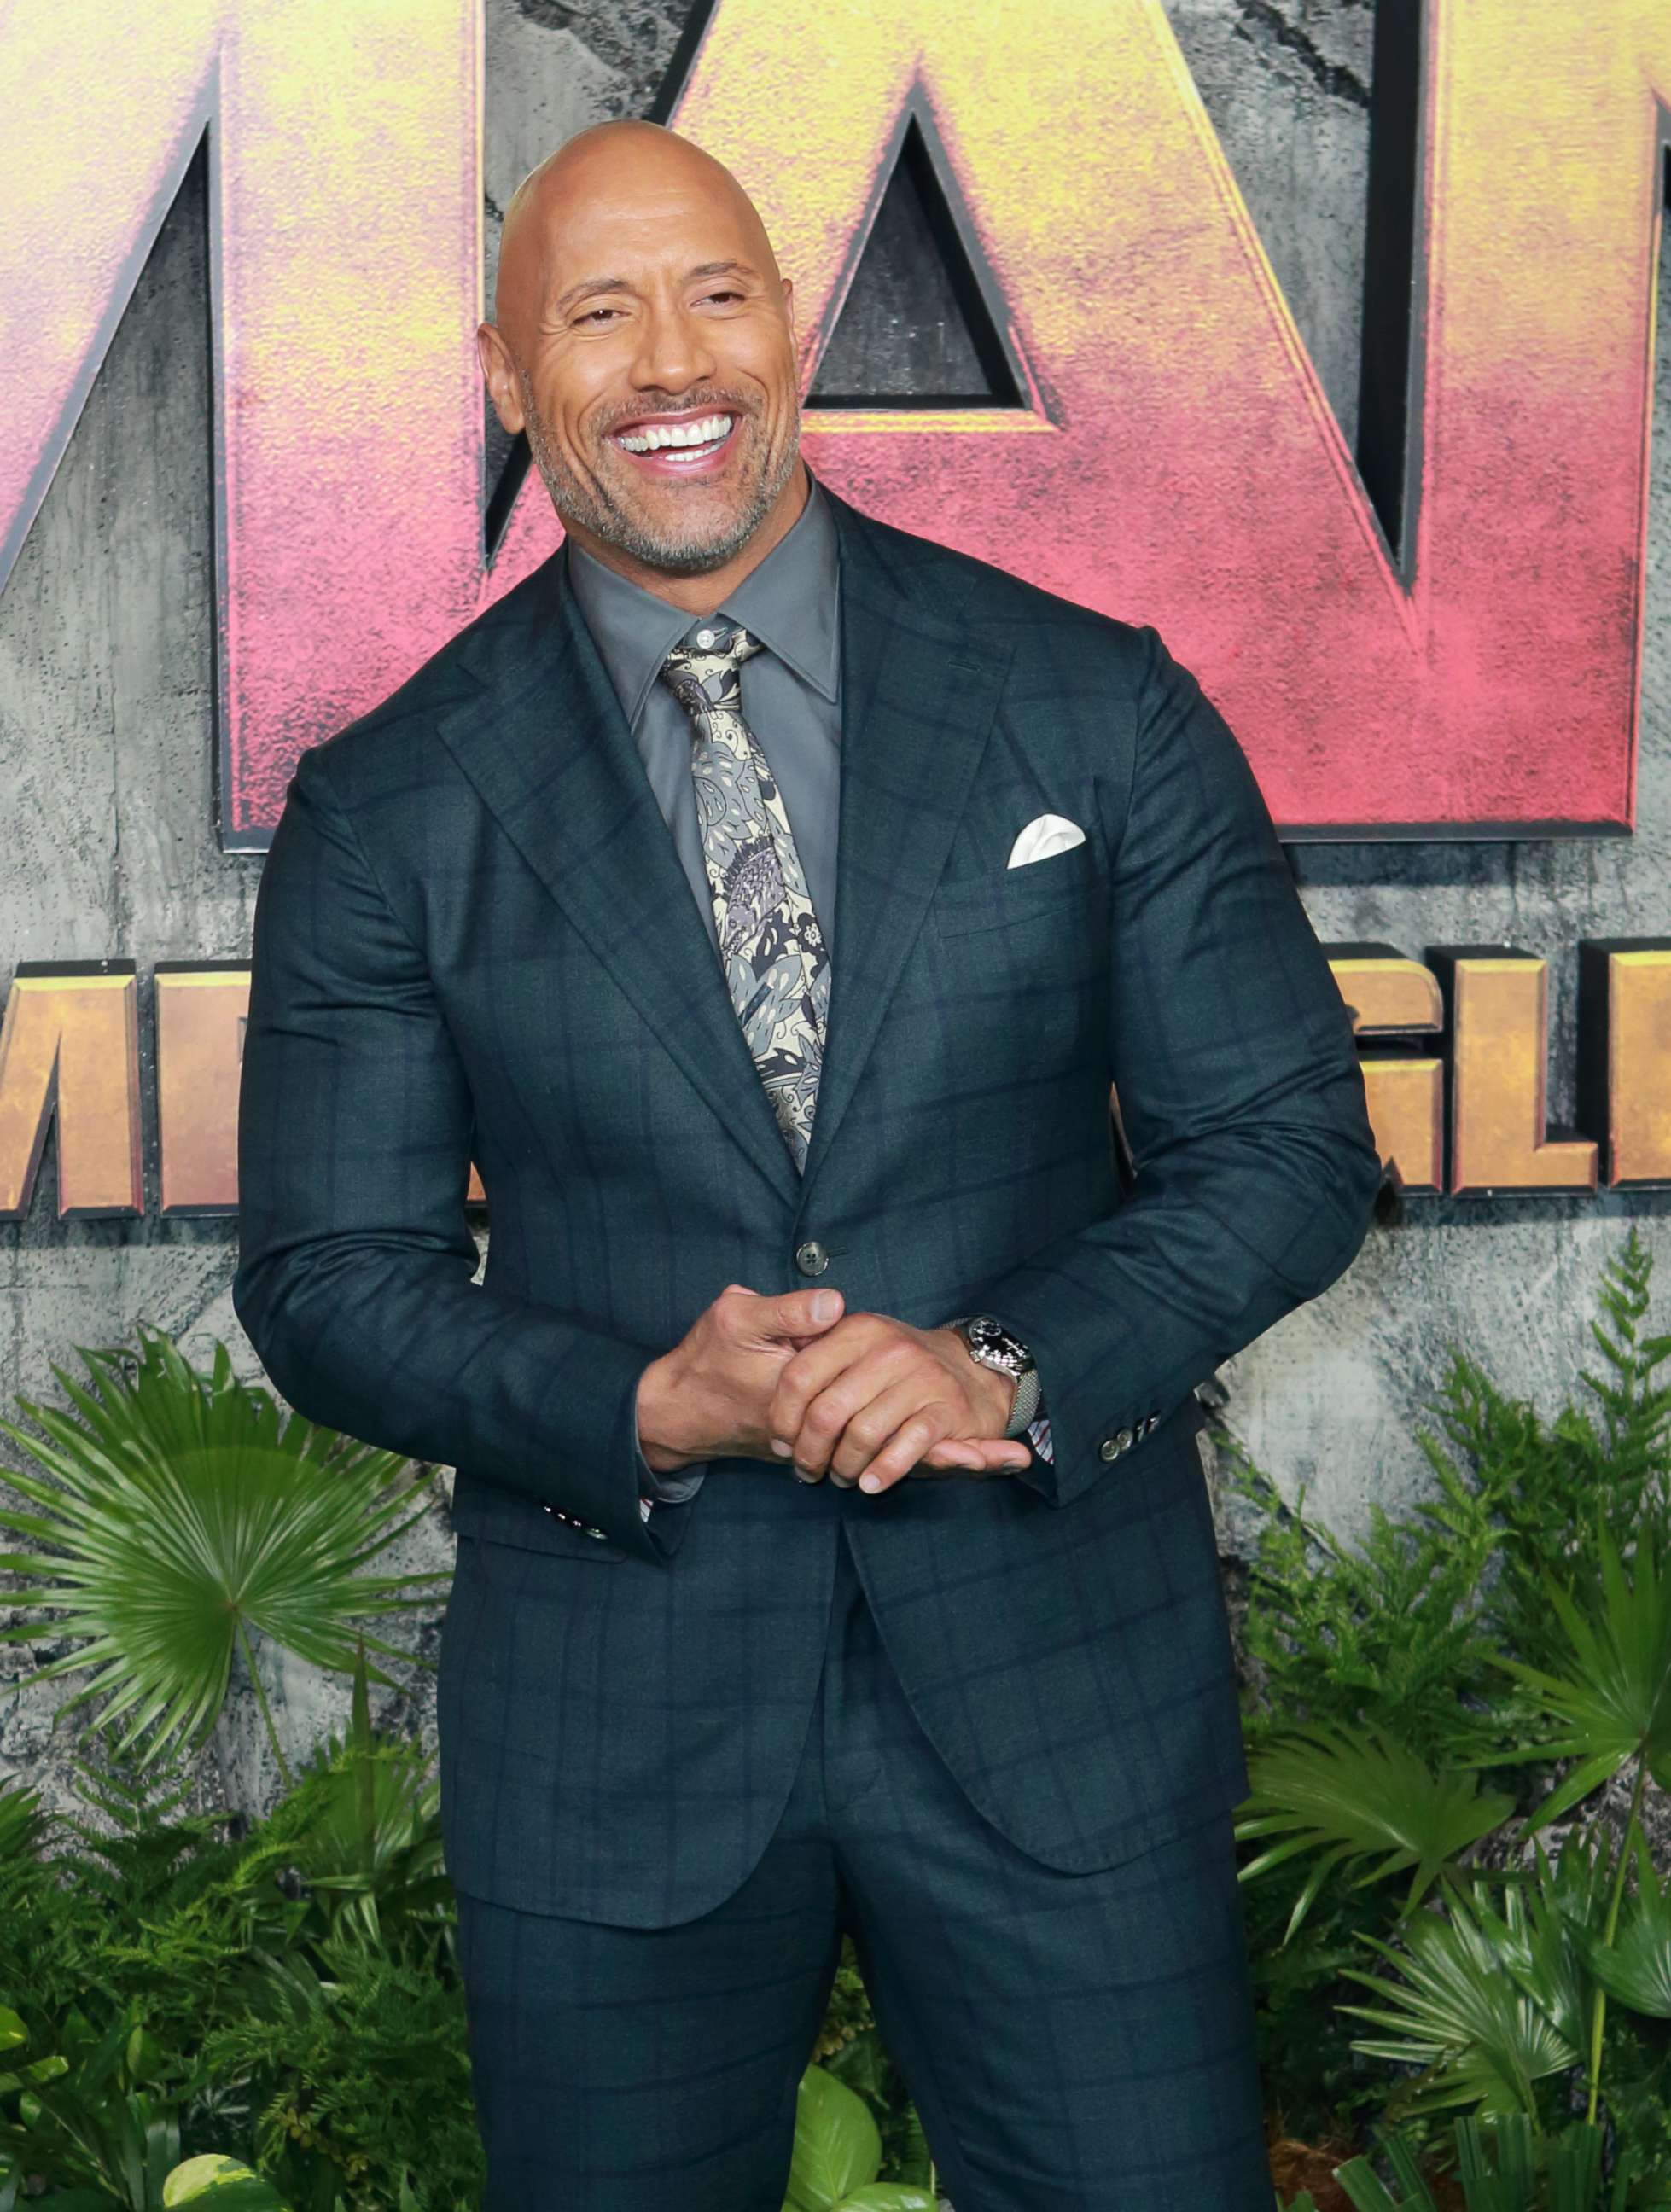 PHOTO: Dwayne Johnson attends the UK premiere of "Jumanji: Welcome To The Jungle" at Vue West End, Dec. 7, 2017 in London.
